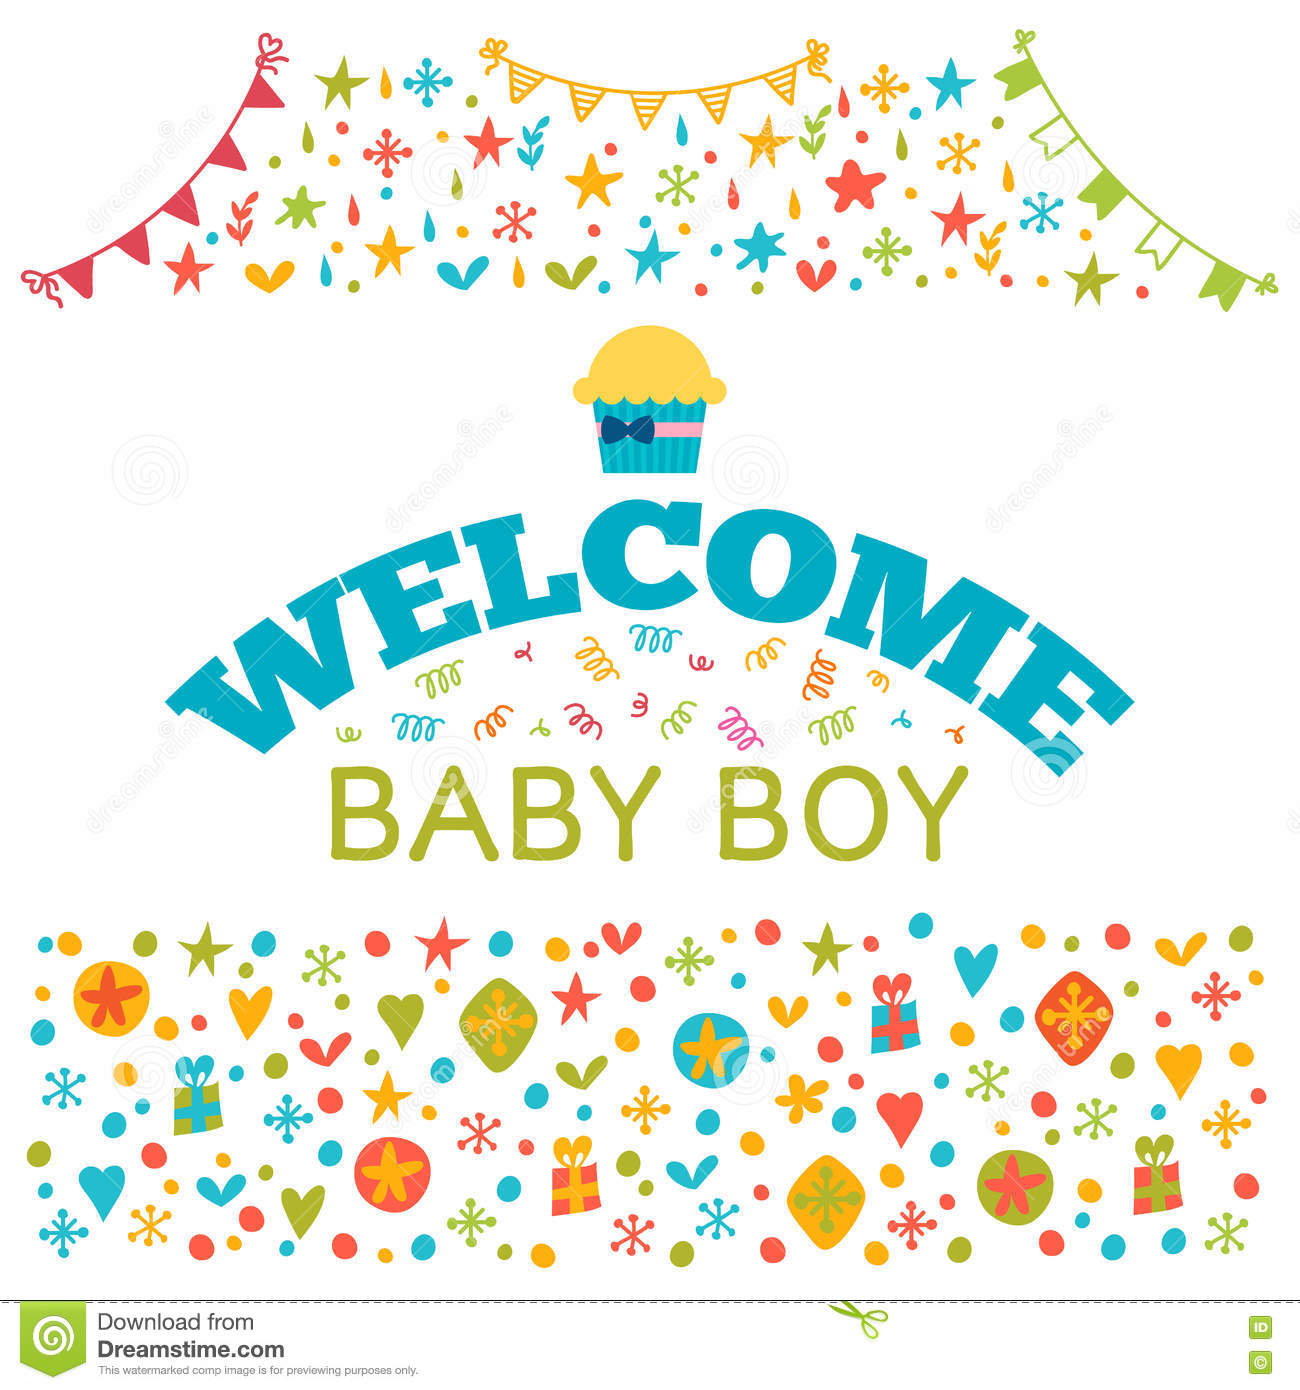 Full Size of Baby Shower:49+ Prime Baby Shower Card Message Photo Concepts Baby Boy Shower Favors With Cheap Baby Shower Gifts Plus Baby Shower Locations Together With Baby Shower Cupcake Cakes